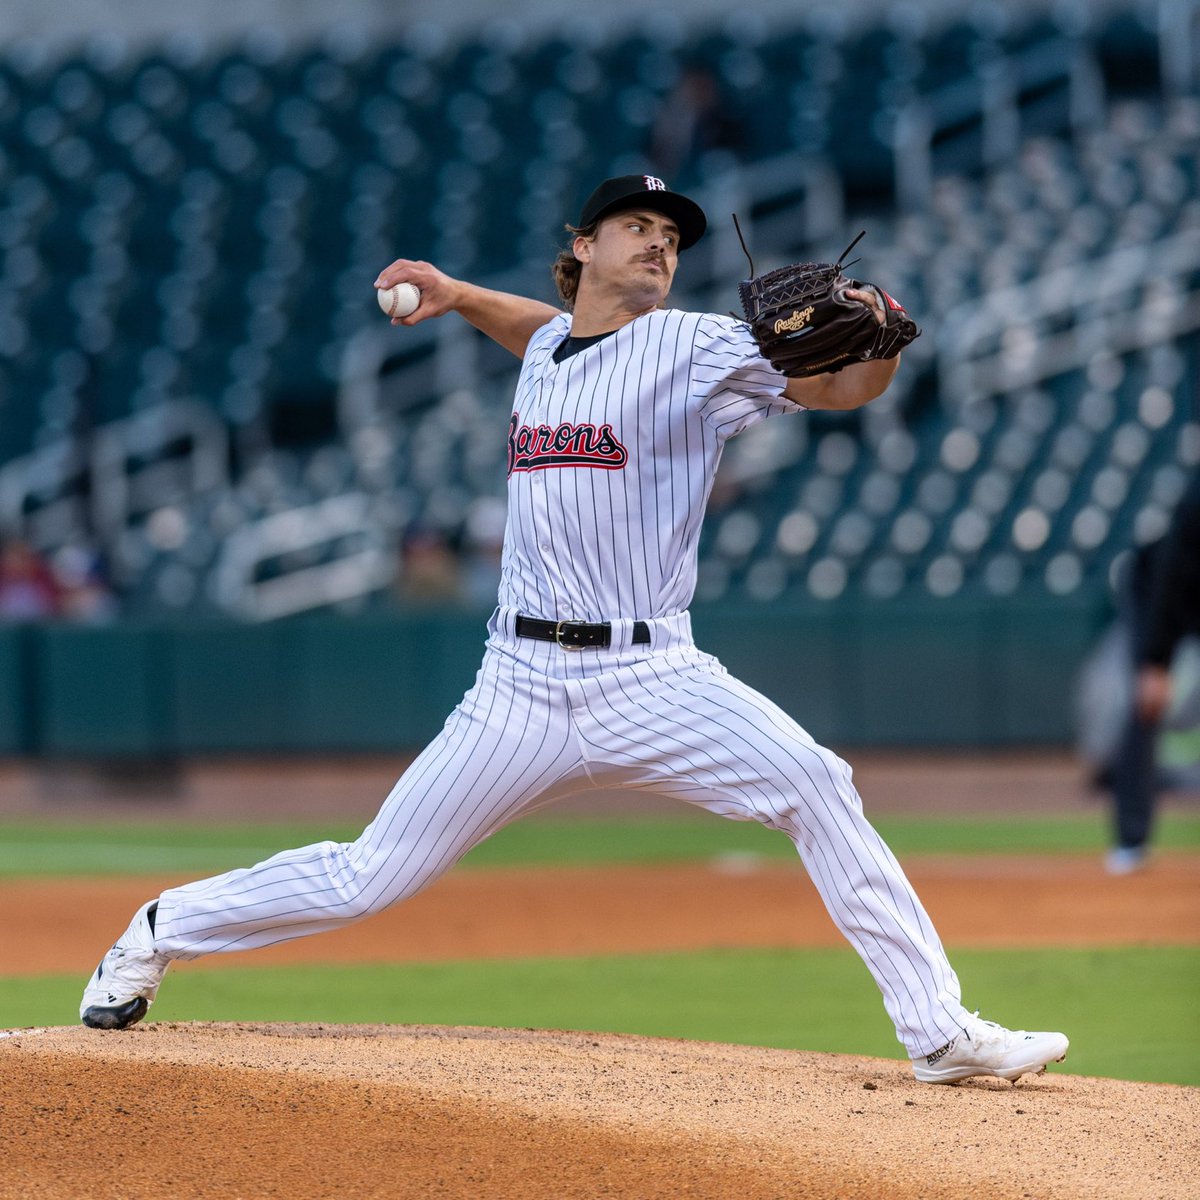 Drew Thorpe gave up 1 run last night in 6 innings for the ⁦@BhamBarons⁩ and saw his ERA actually go up to 0.75. I spoke with Drew about his season so far. And why the Barons are giving me hope for the future. Podcast: whitesoxtalk.com 🎧